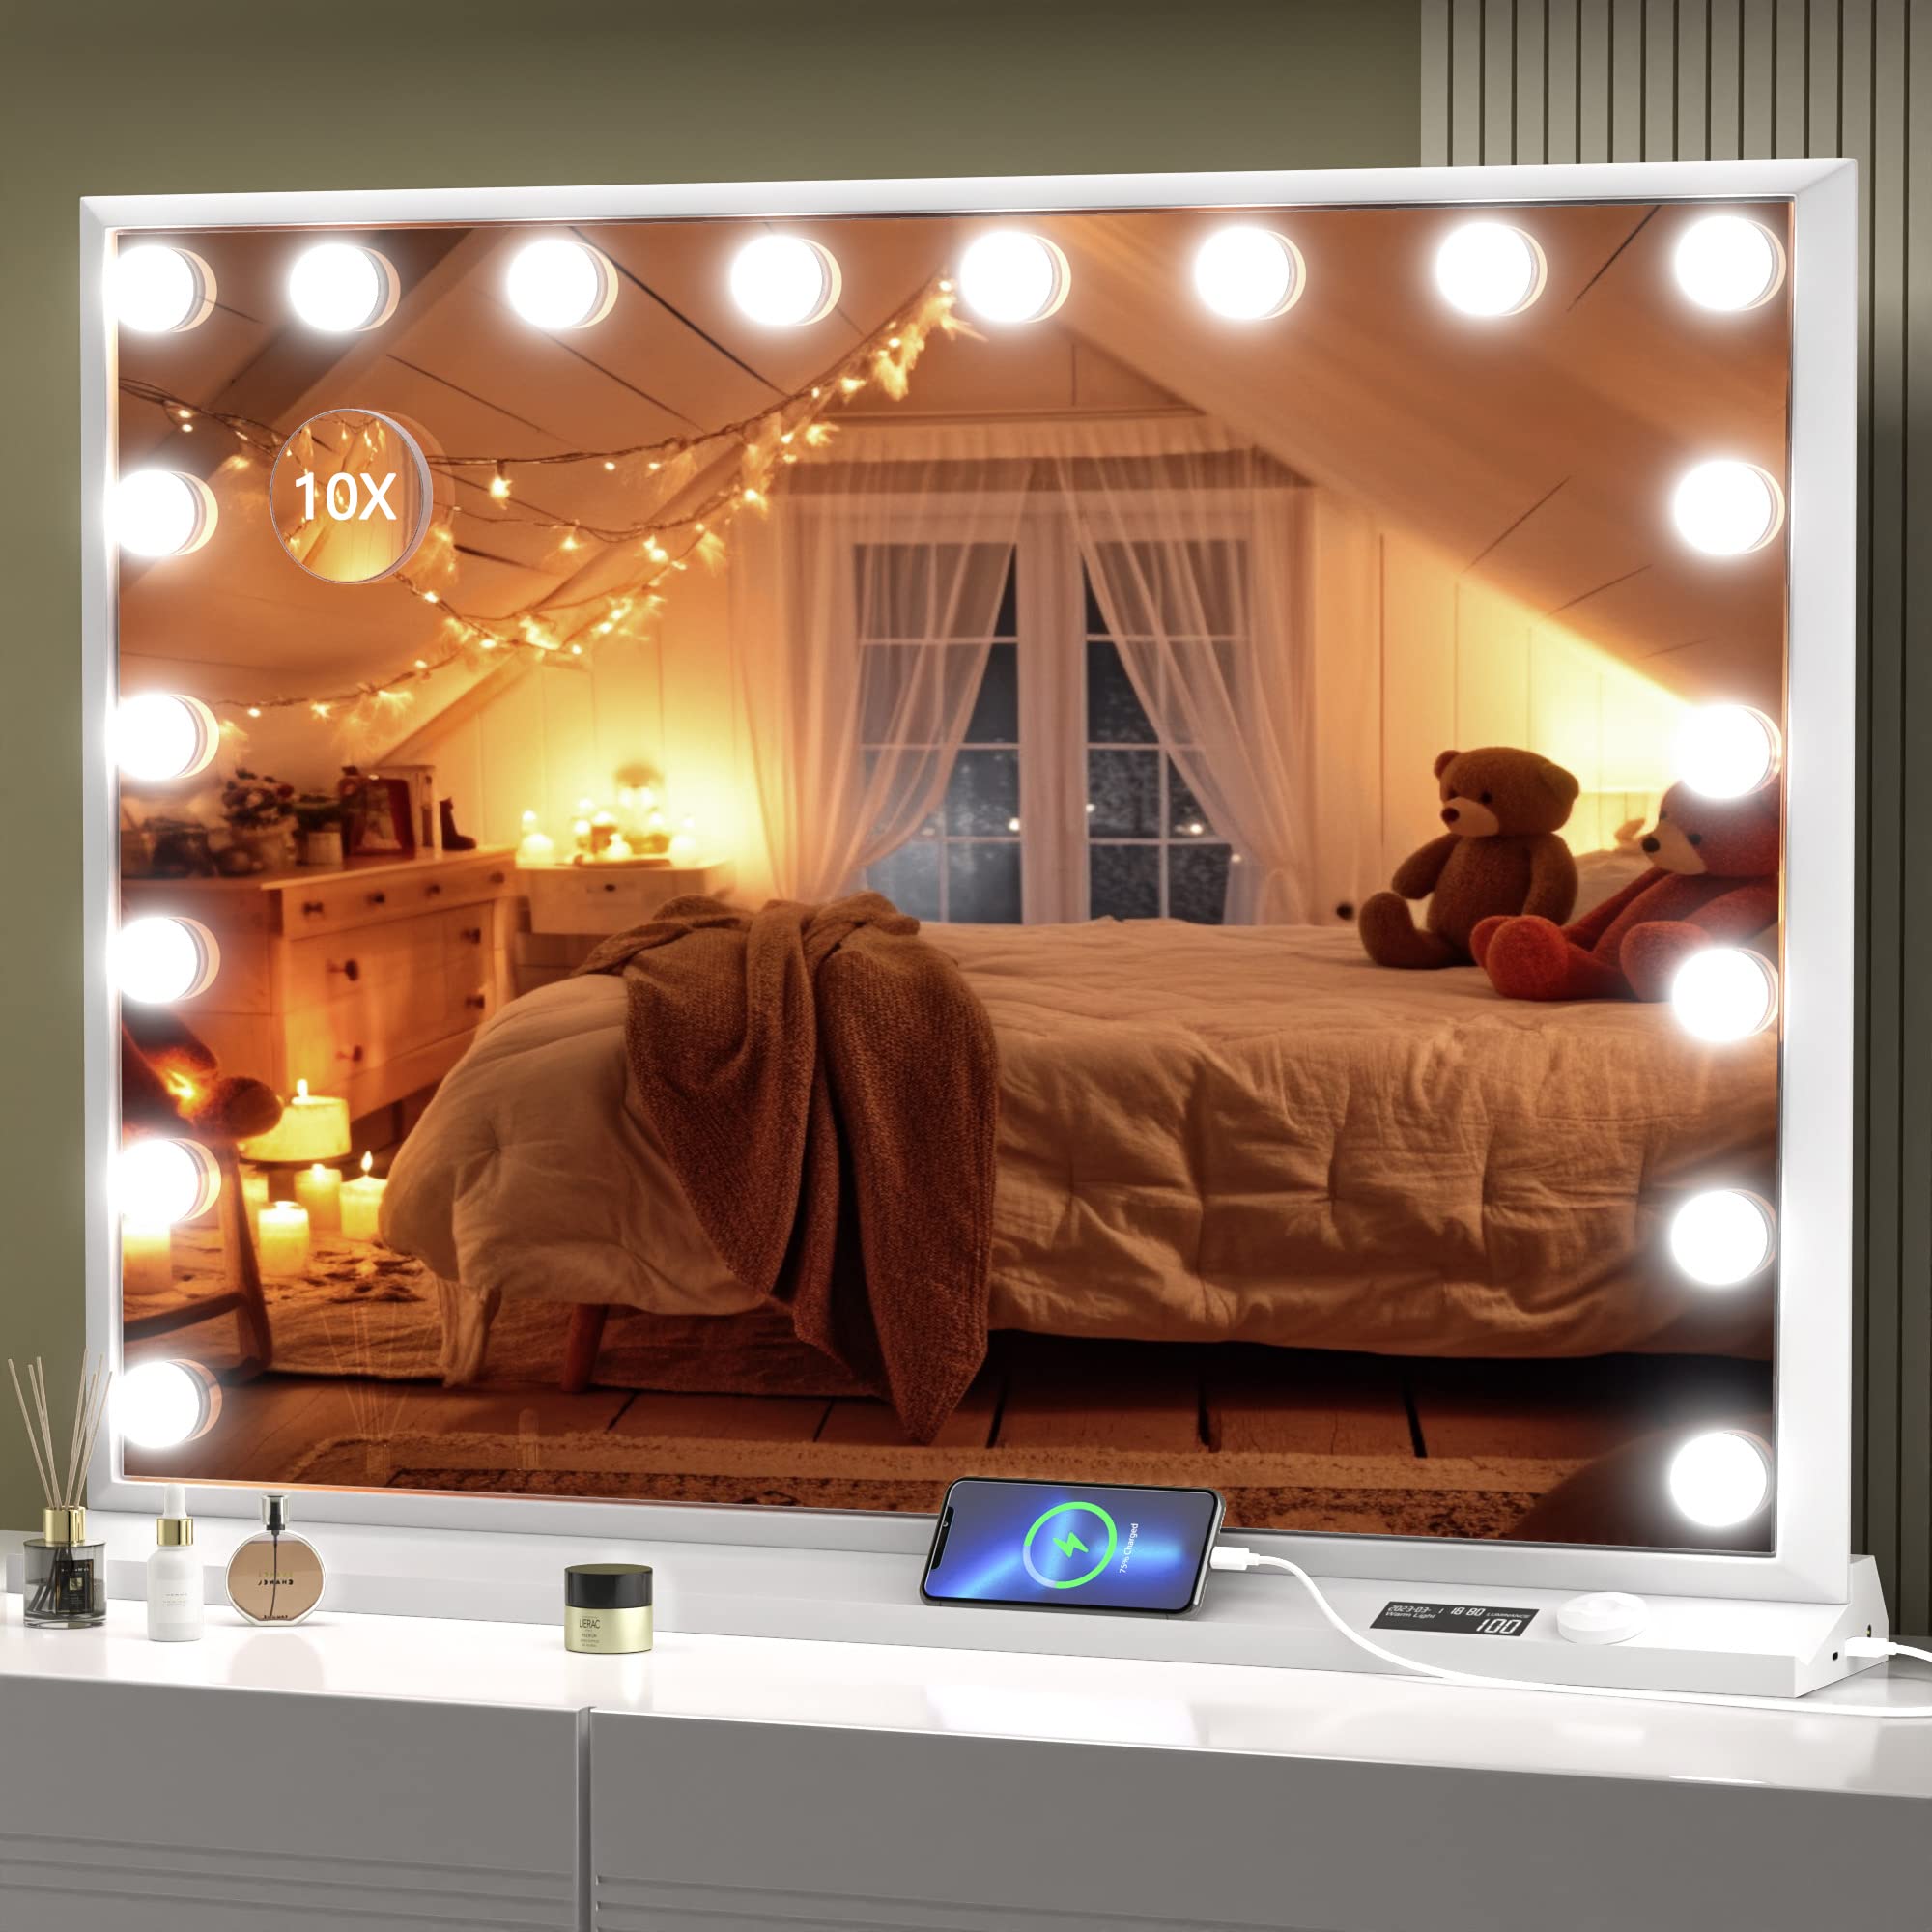 Vosuja Vanity Mirror with Lights 32 x 24 Hollywood Mirror Makeup Mirror with 18 Dimmable Bulbs and 10X Magnification 3 C